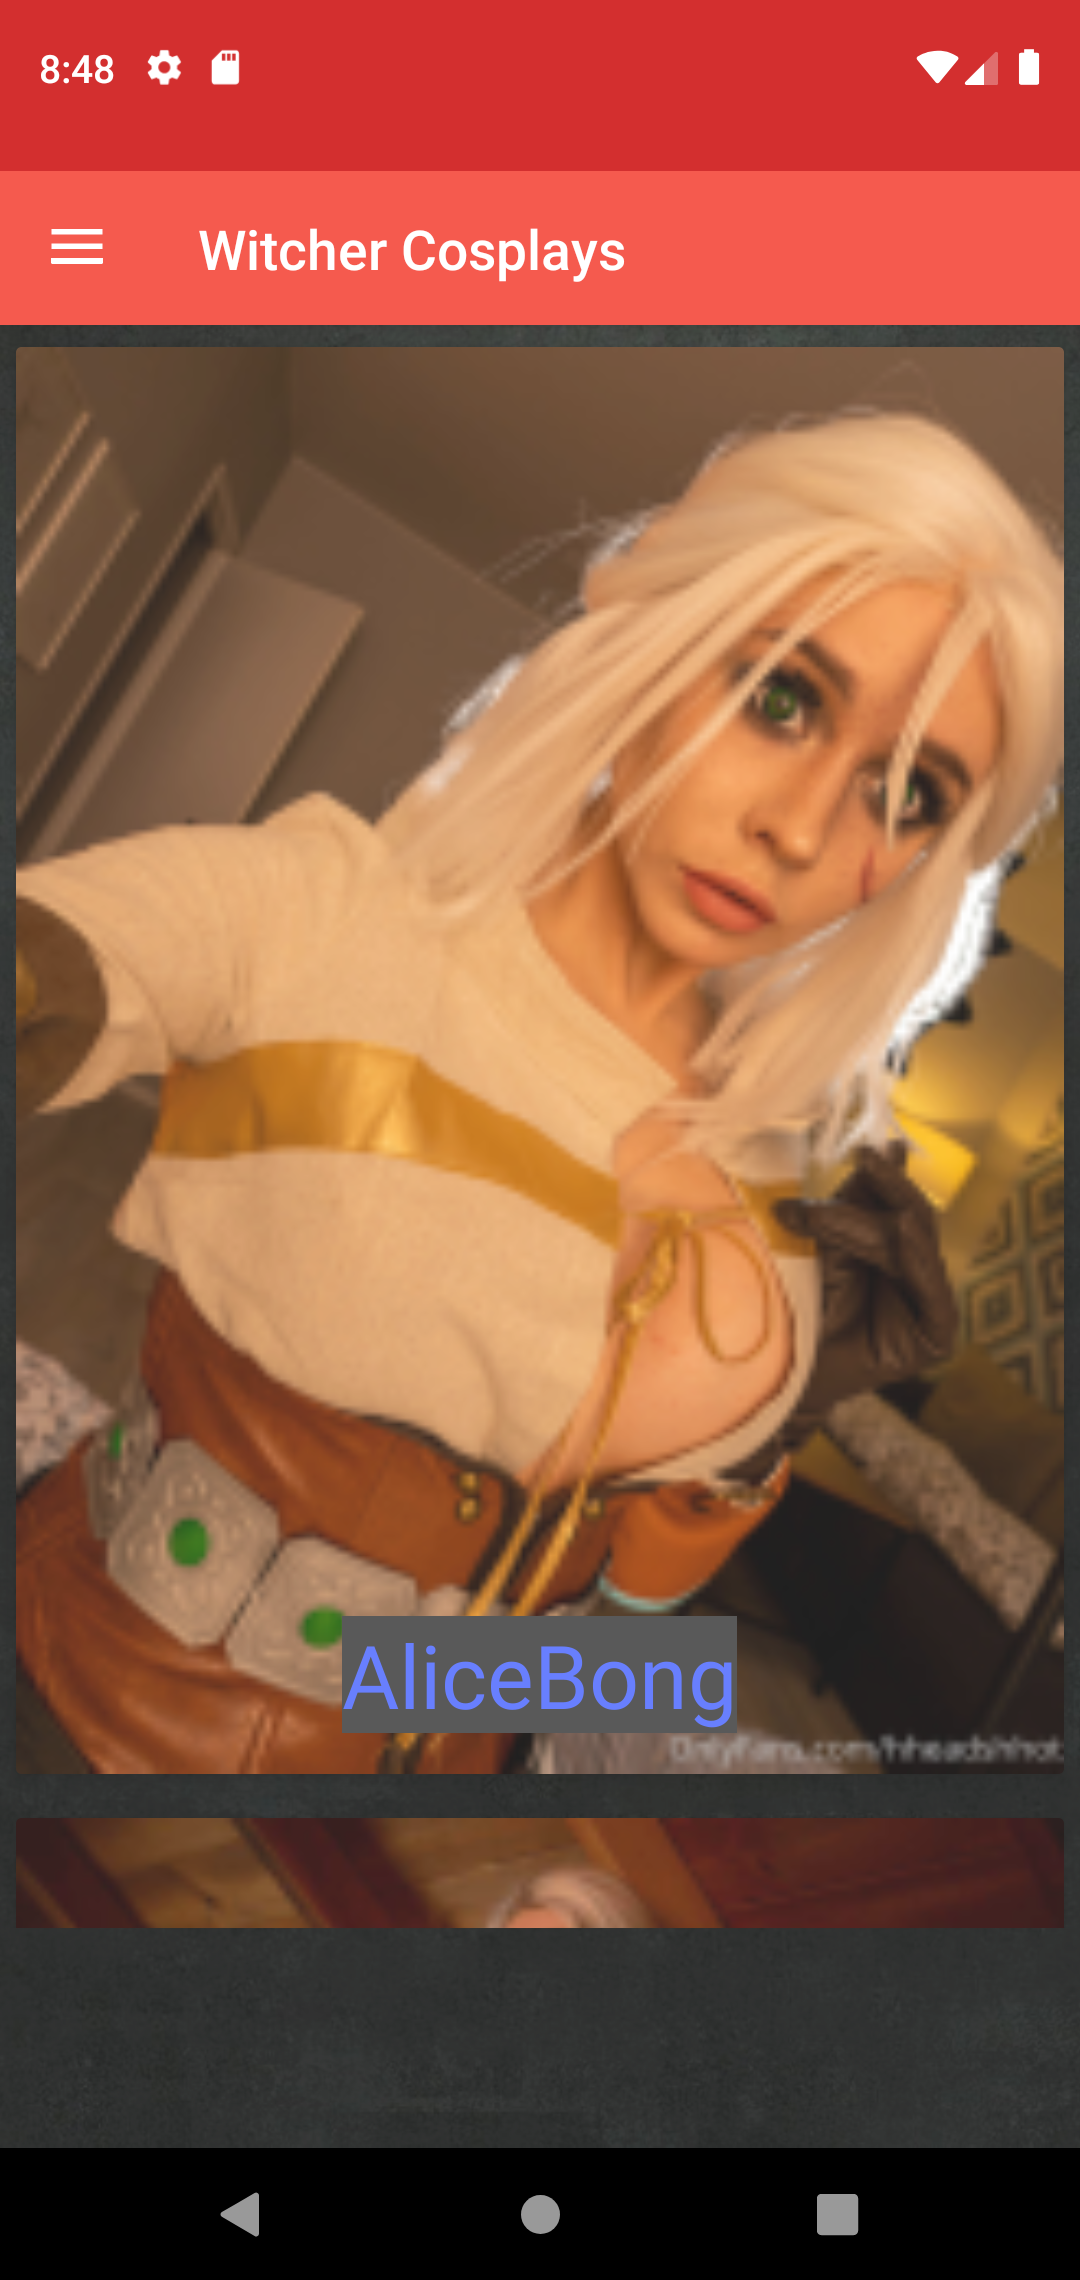 Witcher Cosplays apk,best,comics,manga,witcher,picture,pron,xxx,sexy,adult,gallery,hentai,hot,sexgalleries,app,android,anime,apps,porn,hotebonypics,erotic,cosplay,mature,images